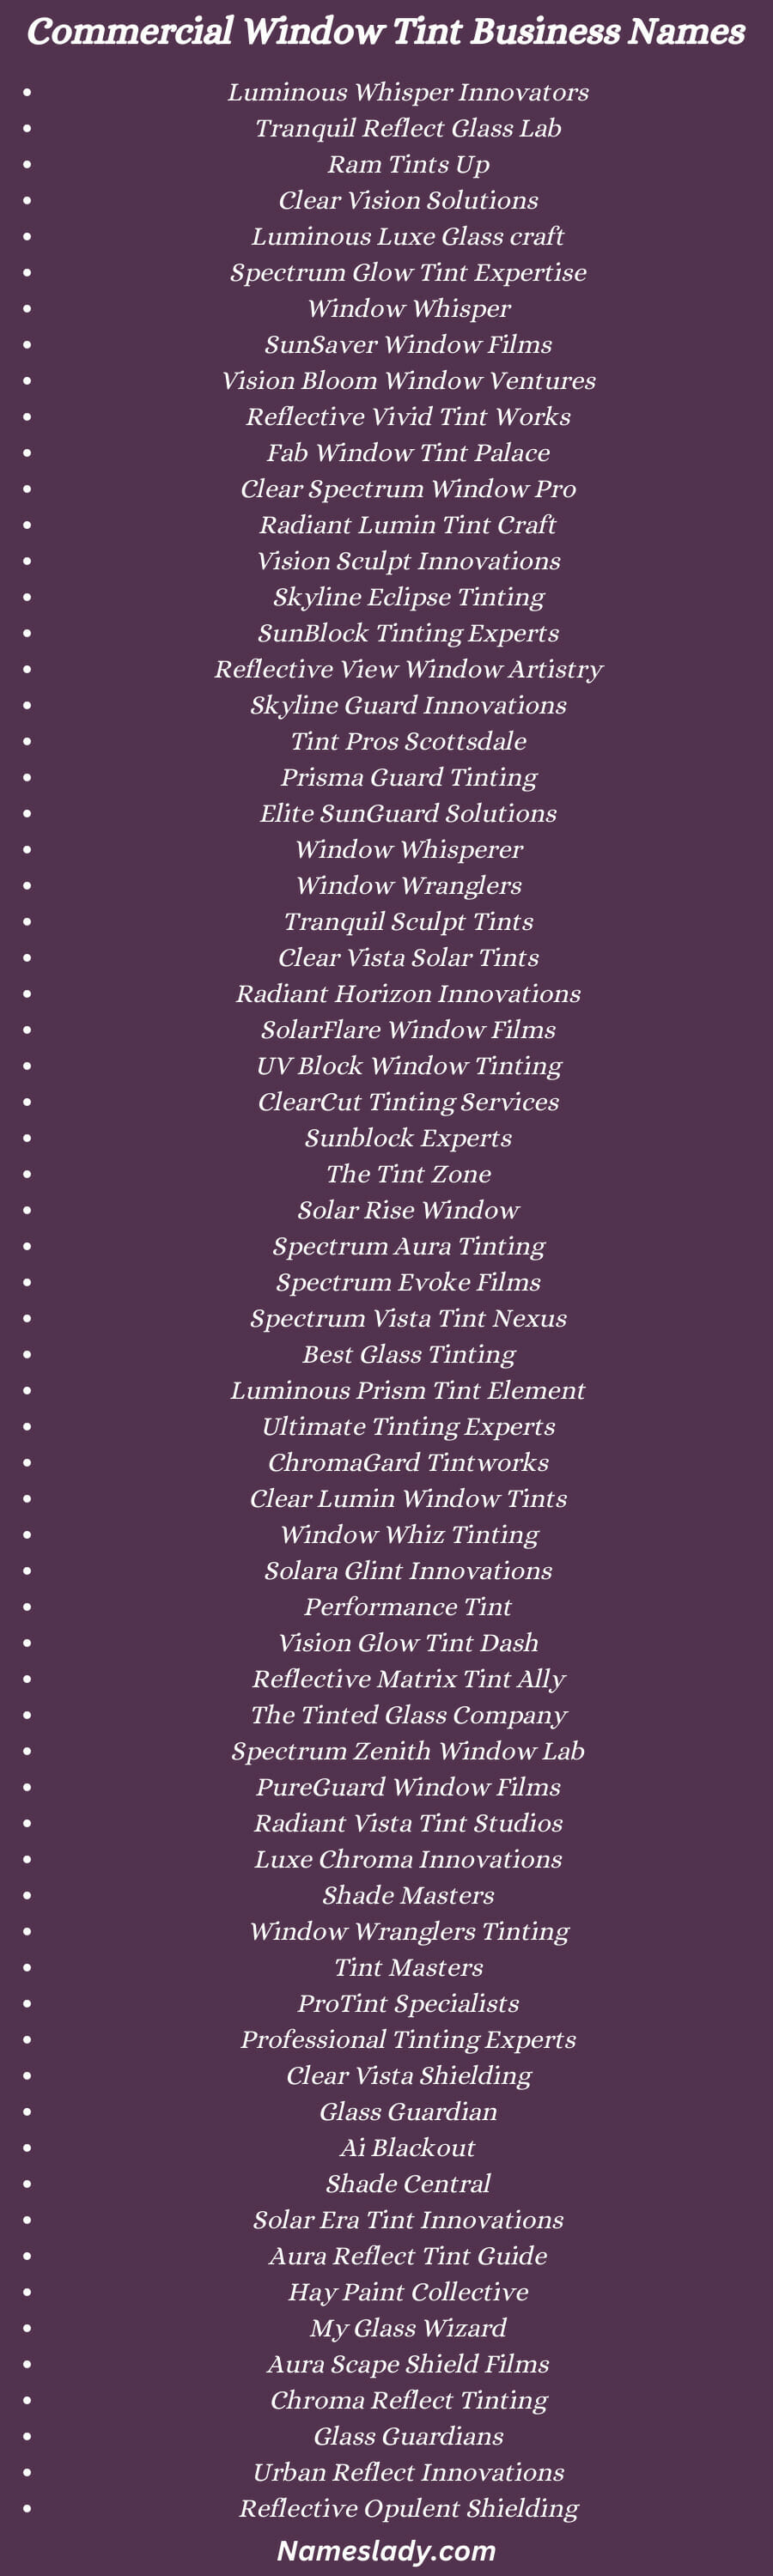 Commercial Window Tint Business Names